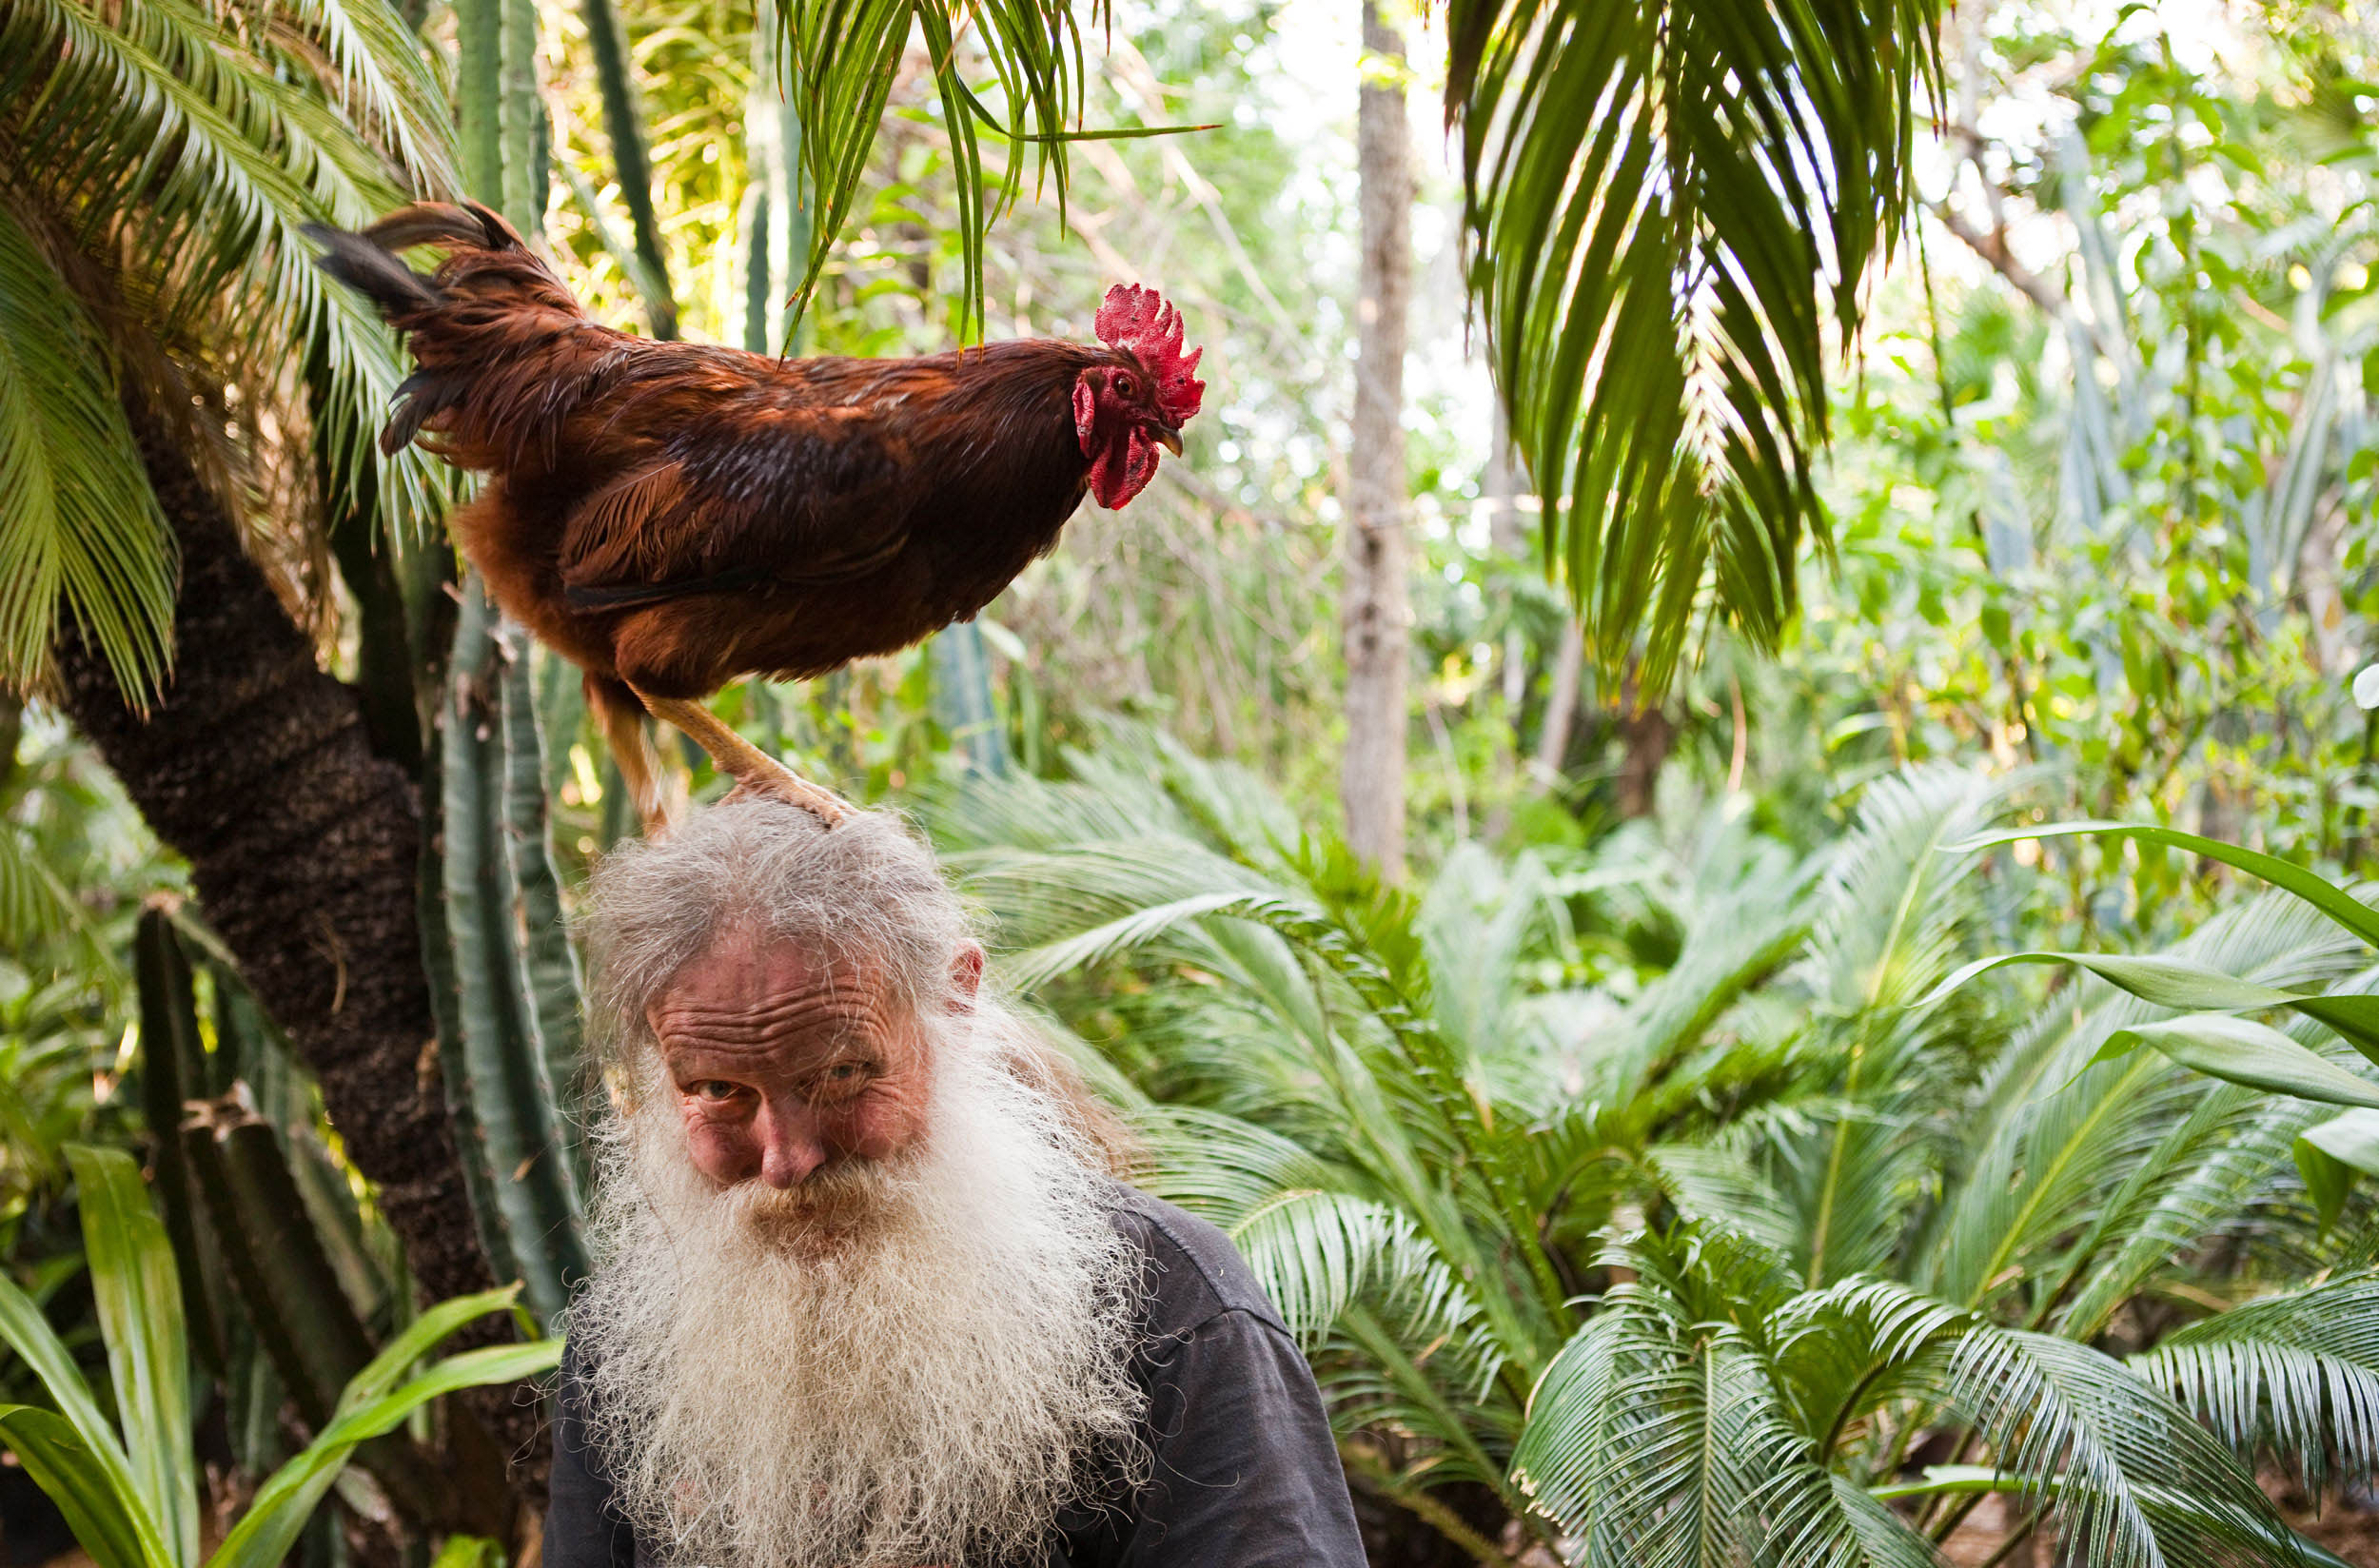 Tim Dundon, Compost Wizard, and His Rooster Elvis, by Commercial Photographer Michael Weschler